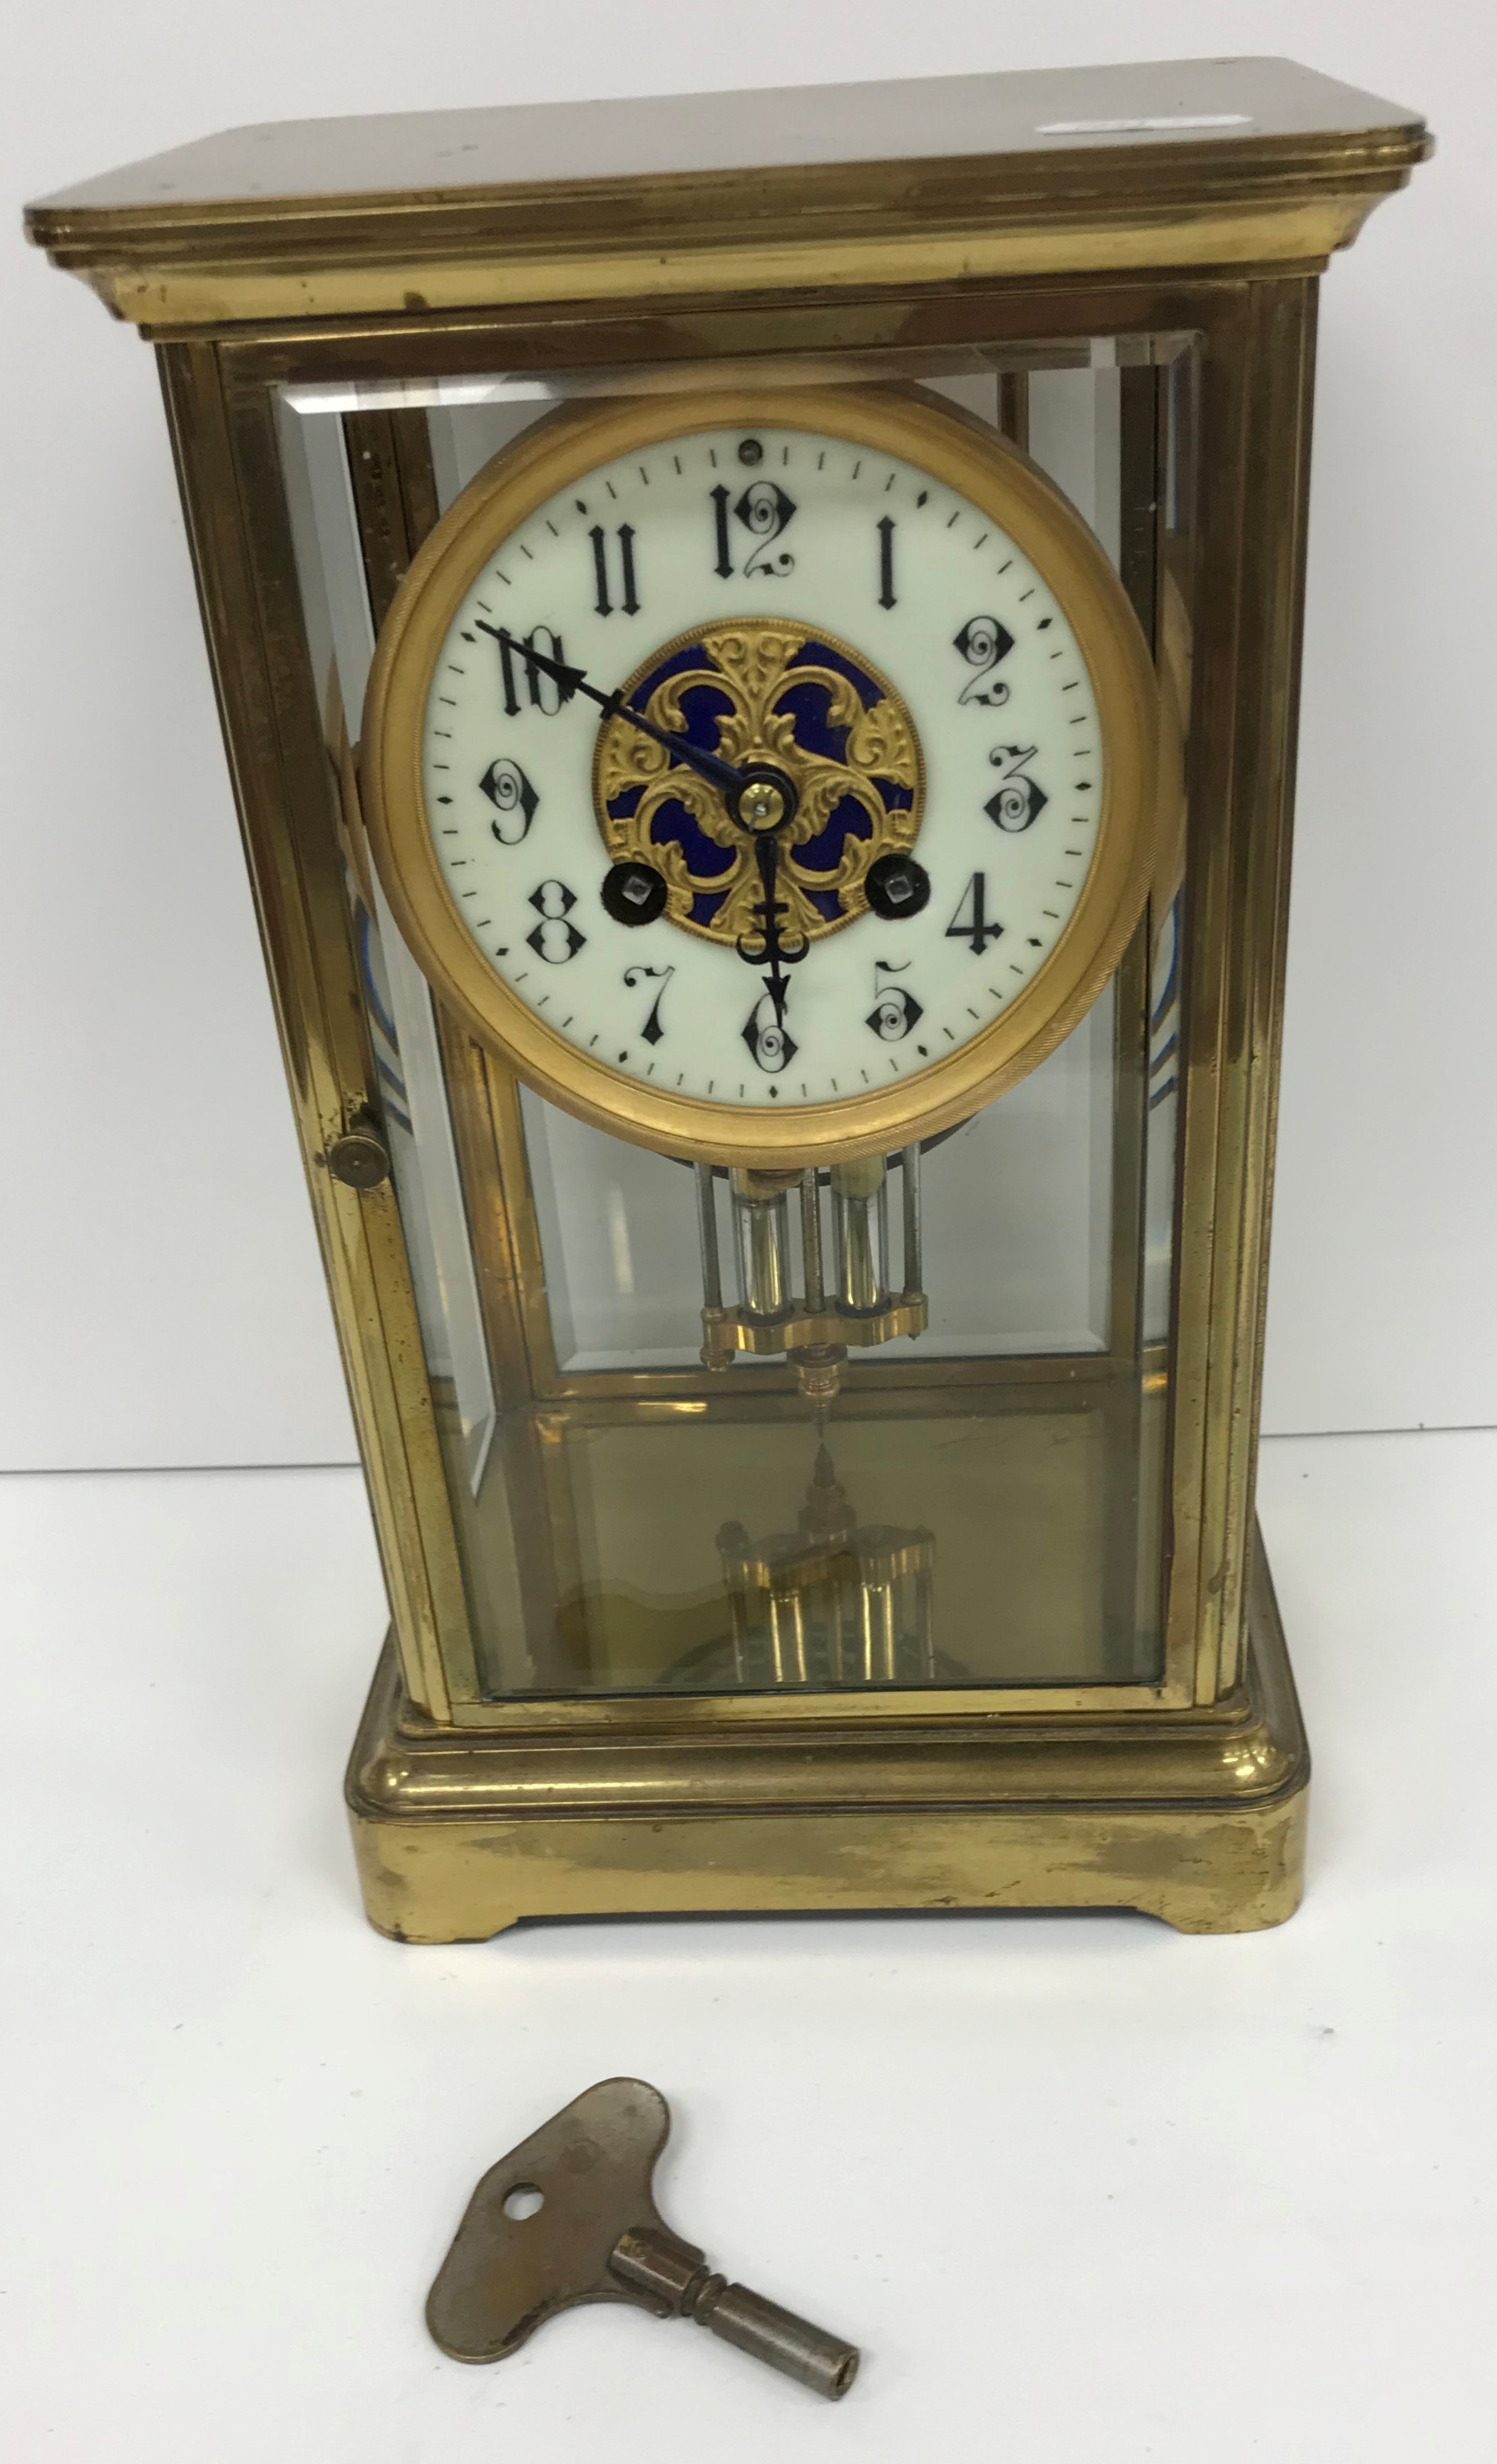 A circa 1900 French four glass brass cased mantel clock in the manner of Marti,